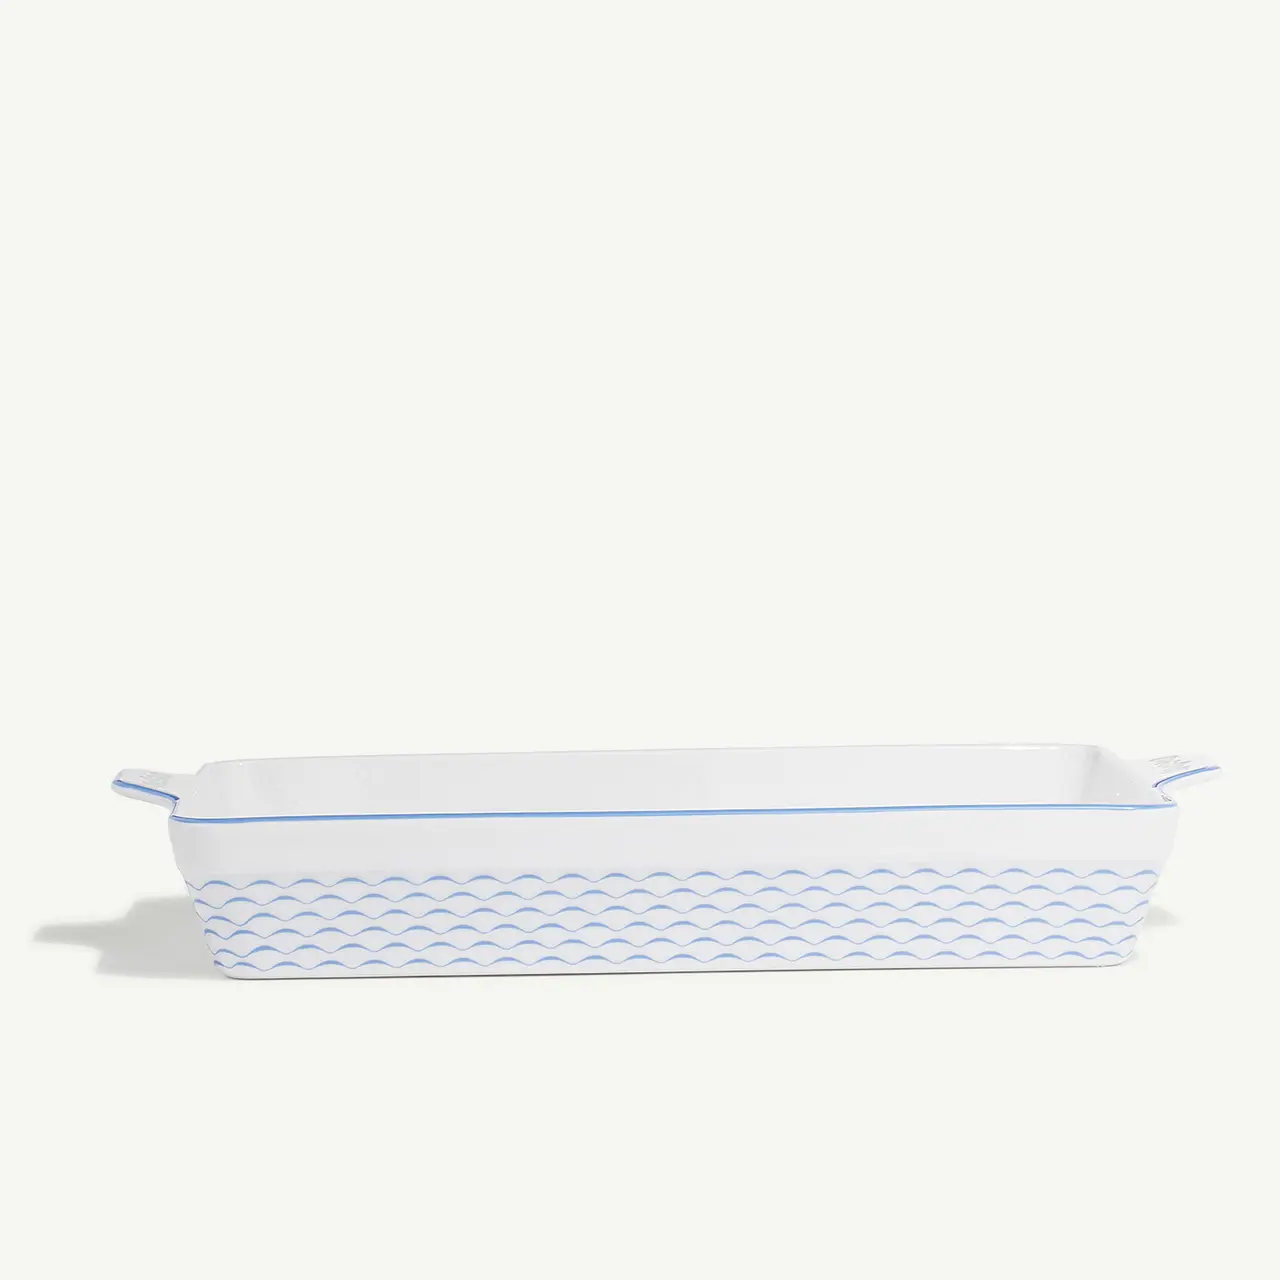 A white ceramic baking dish with blue trim and a fish scale pattern is displayed against a neutral background.